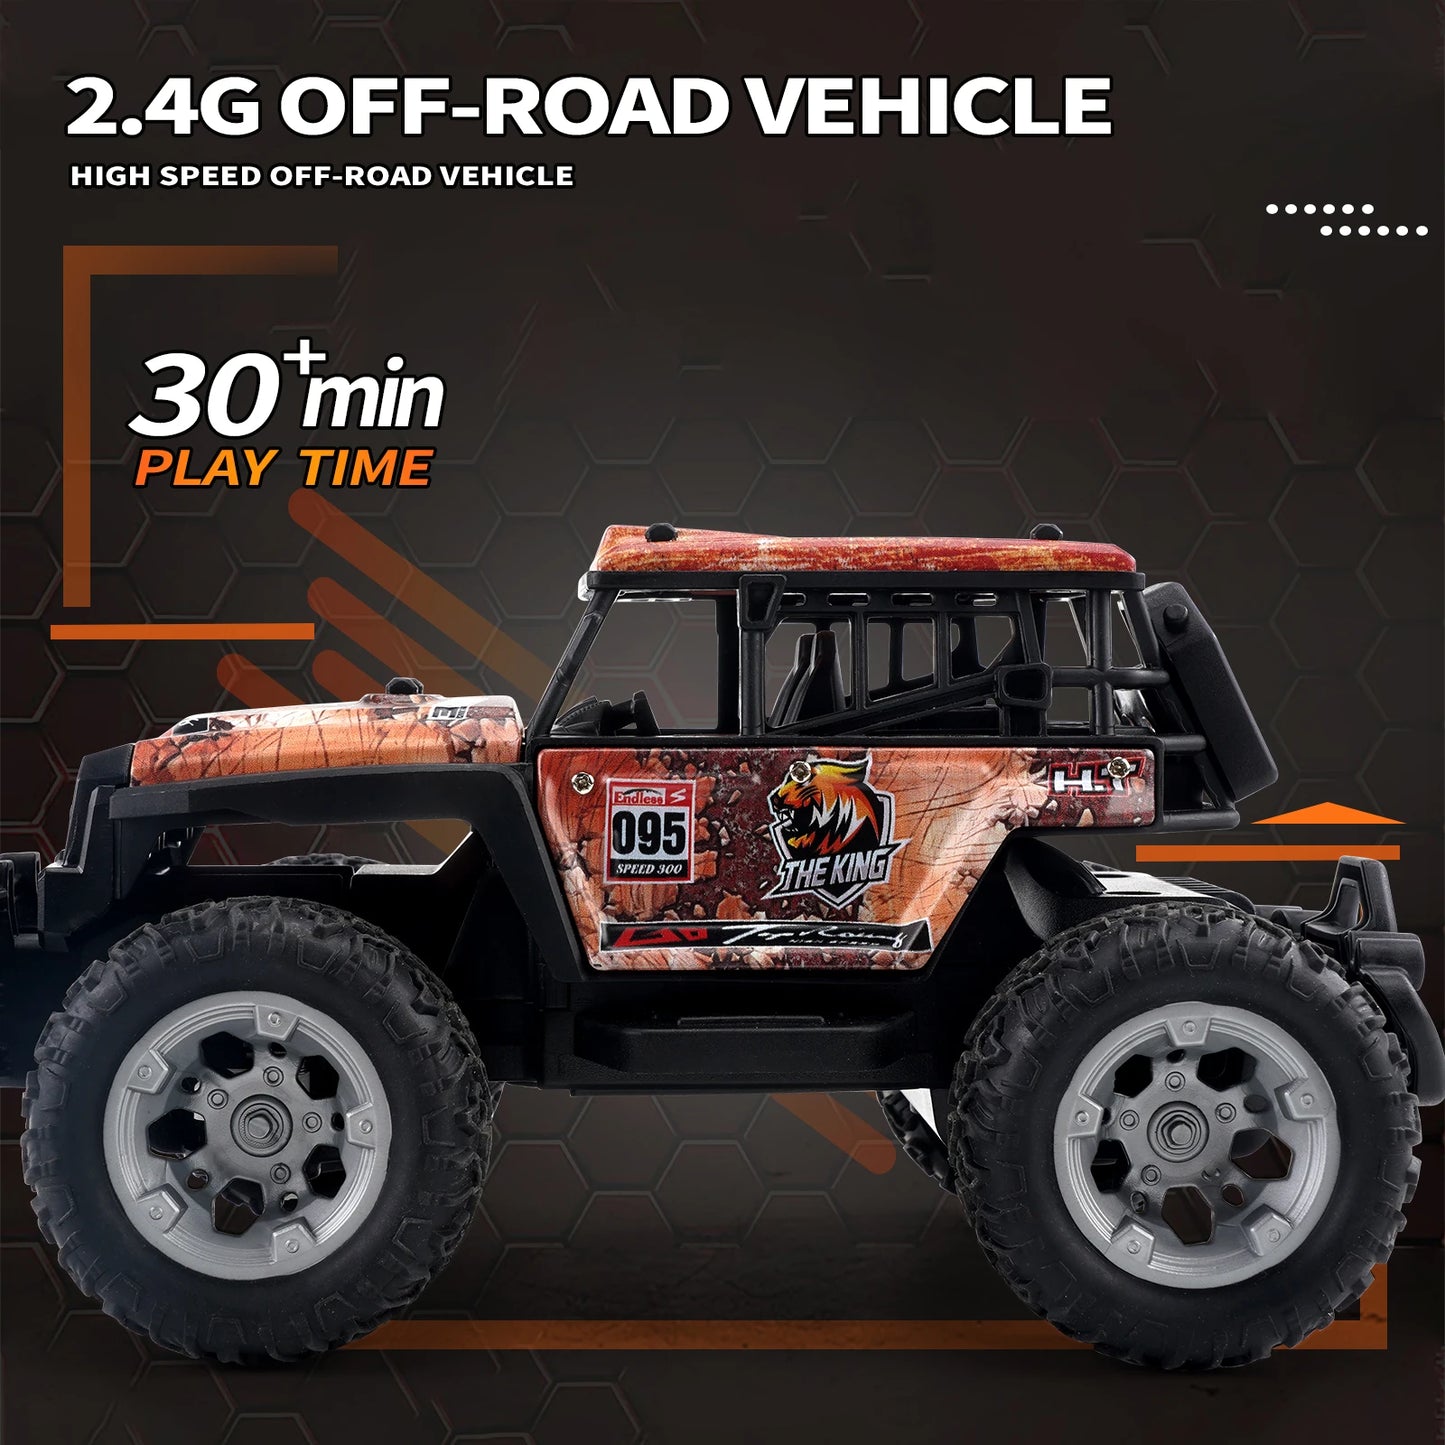 High Speed 1:20 Scale RC Car with LED Lights and Double Motors - Off-Road Monster Truck